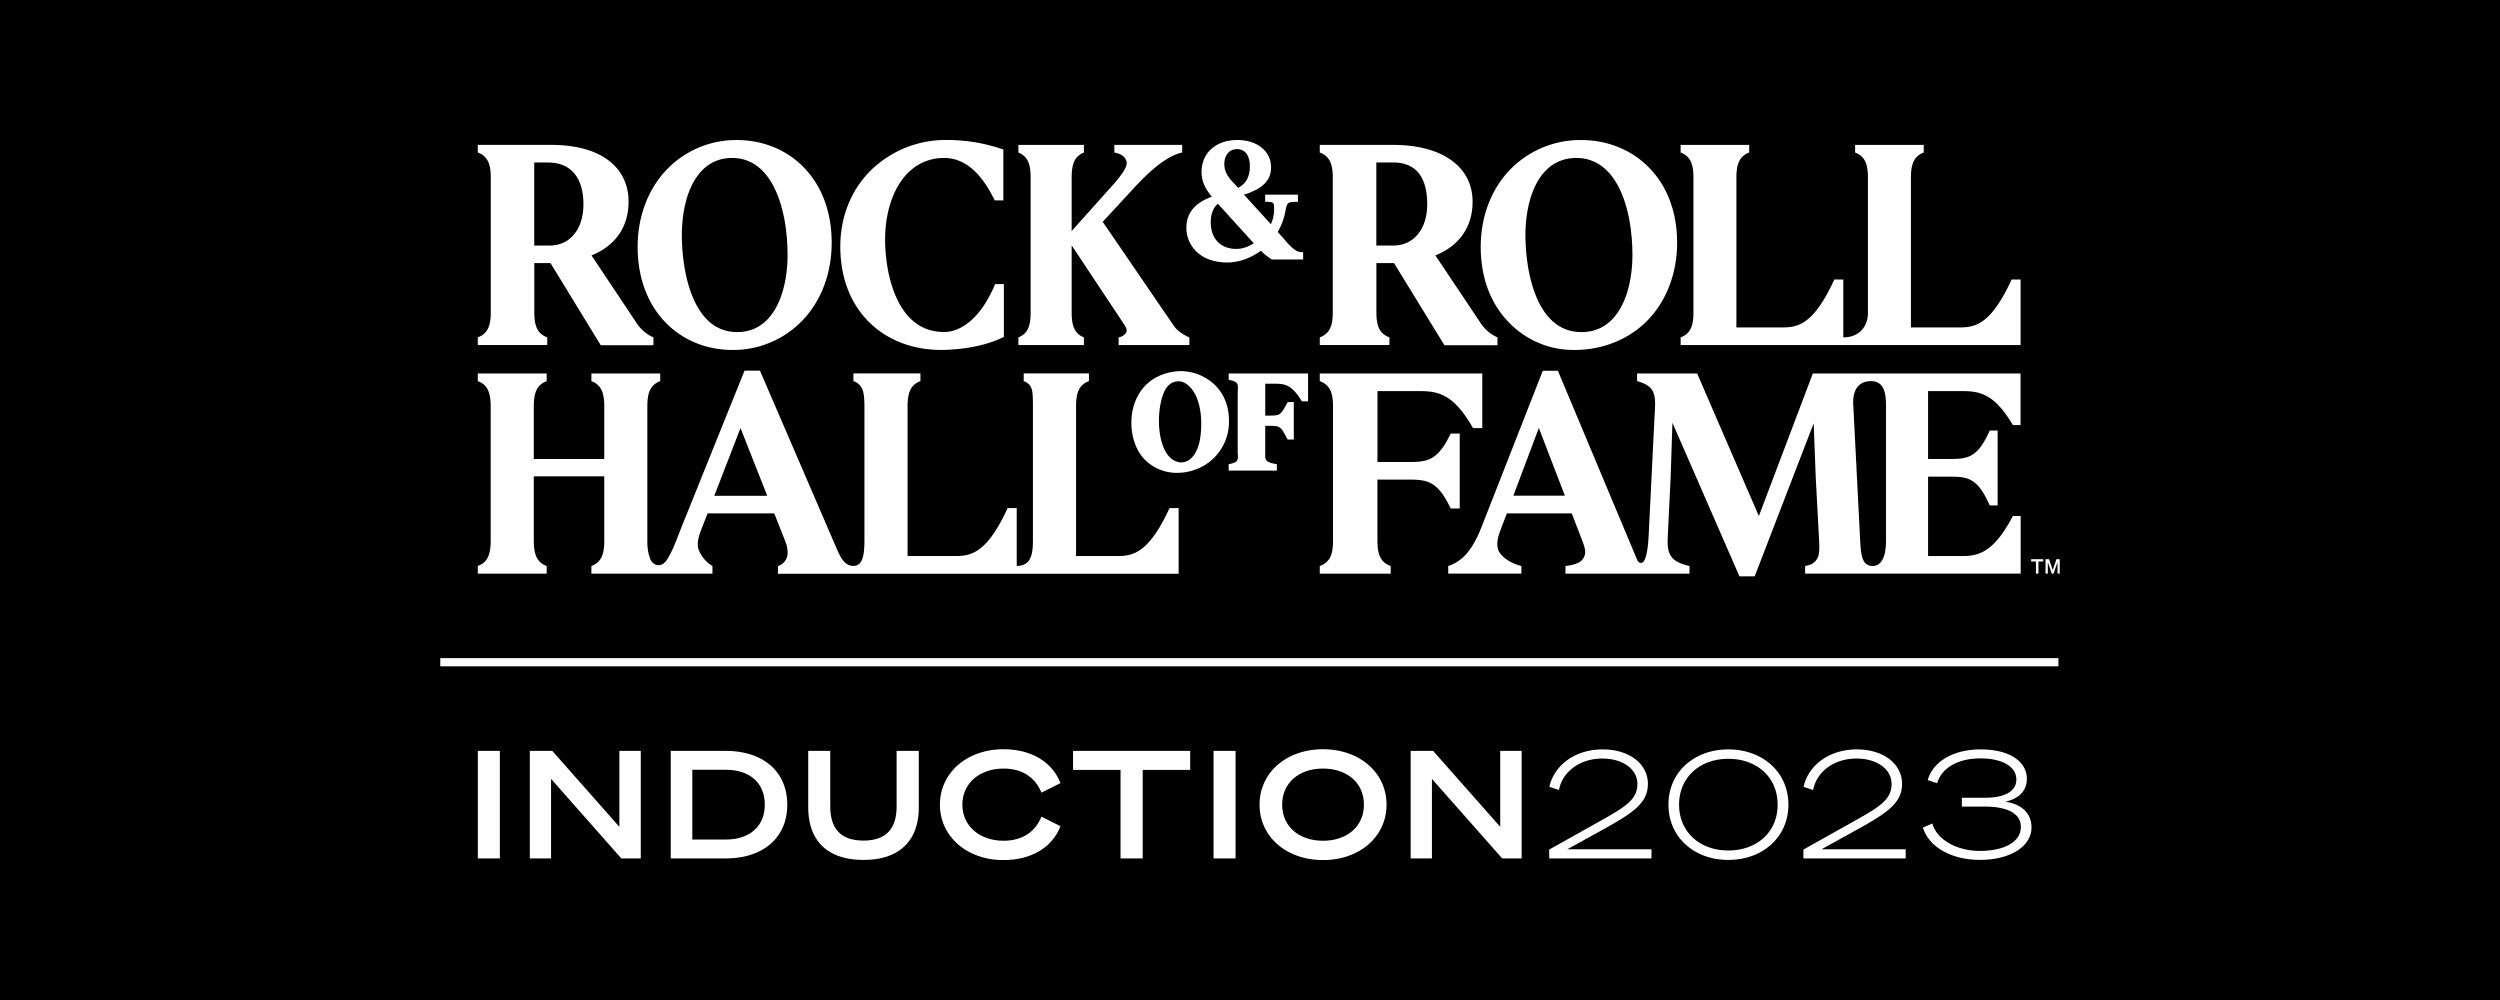 2023 Rock & Roll Hall Of Fame Induction Ceremony” Coming Soon To Disney+  (UK/IE/CA/AU/NZ) – What's On Disney Plus